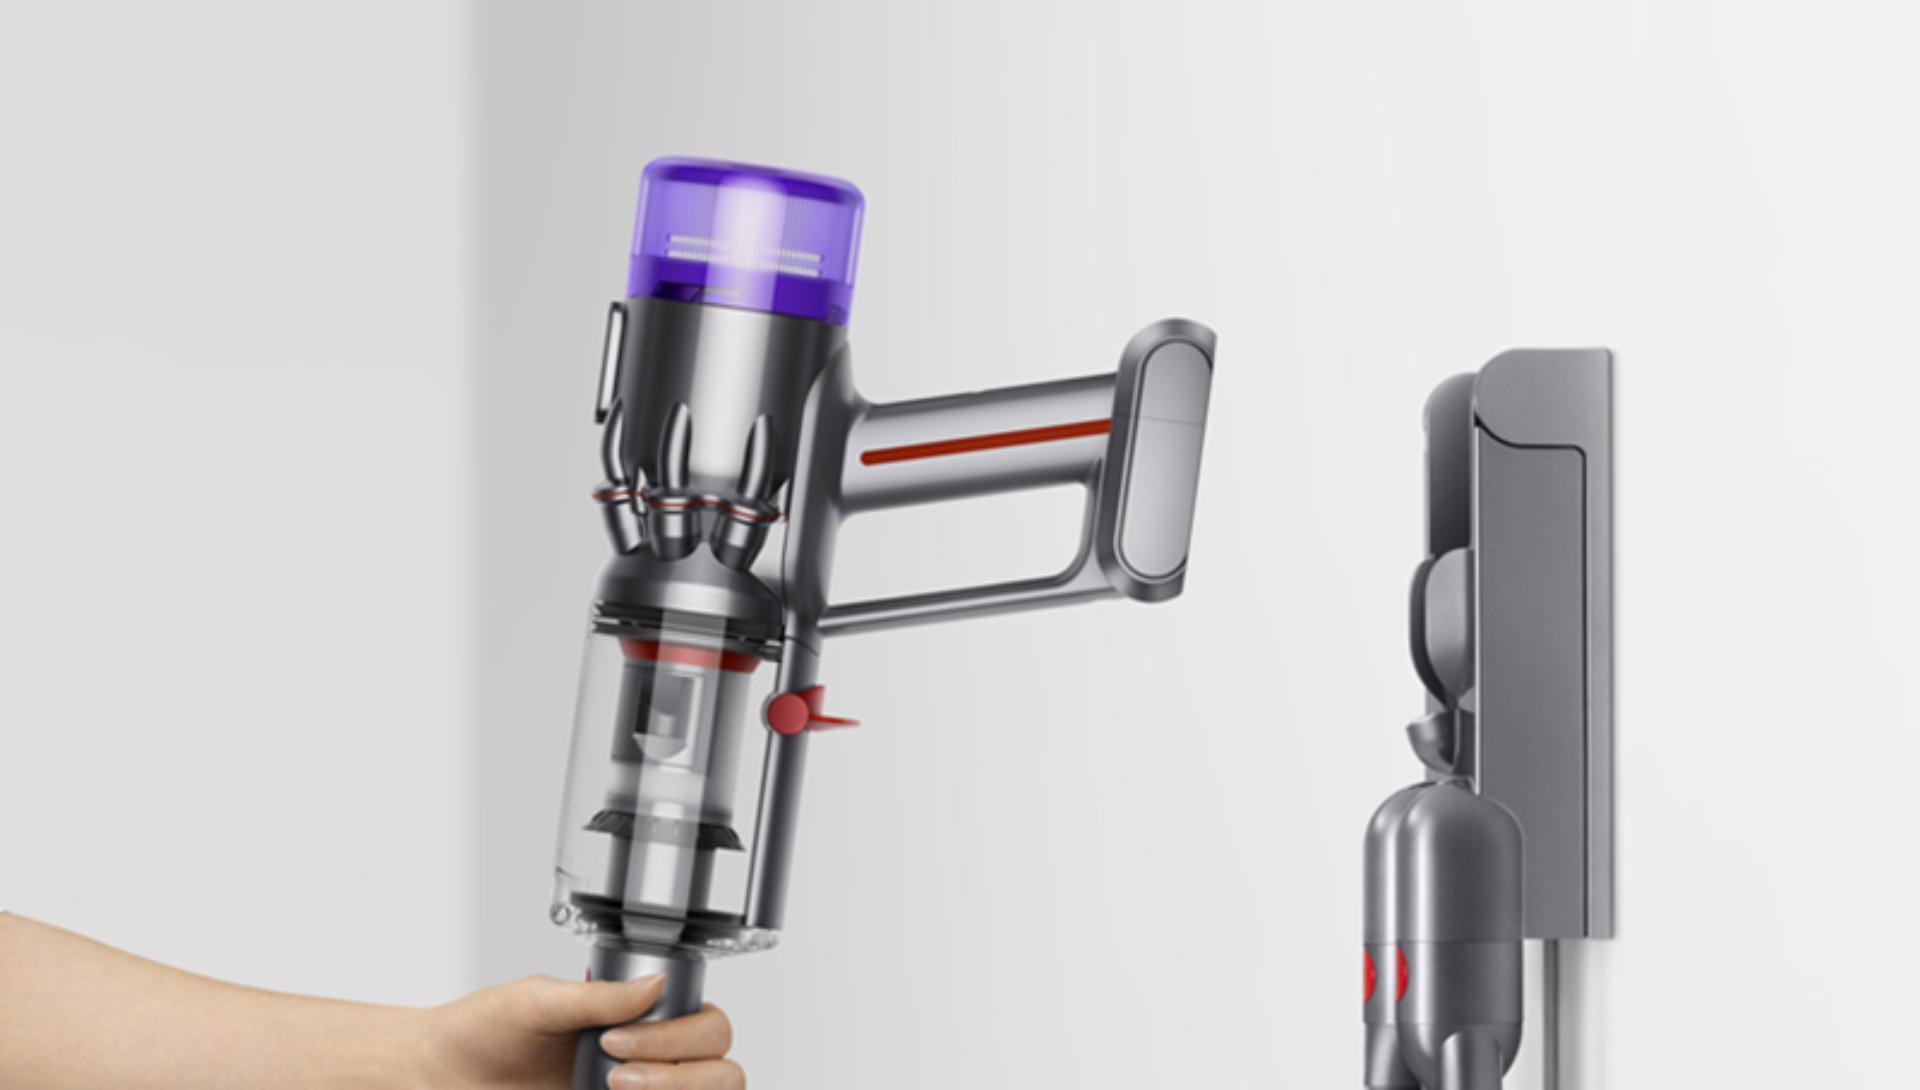 Dyson Humdinger handheld vacuum being put into a wall dock